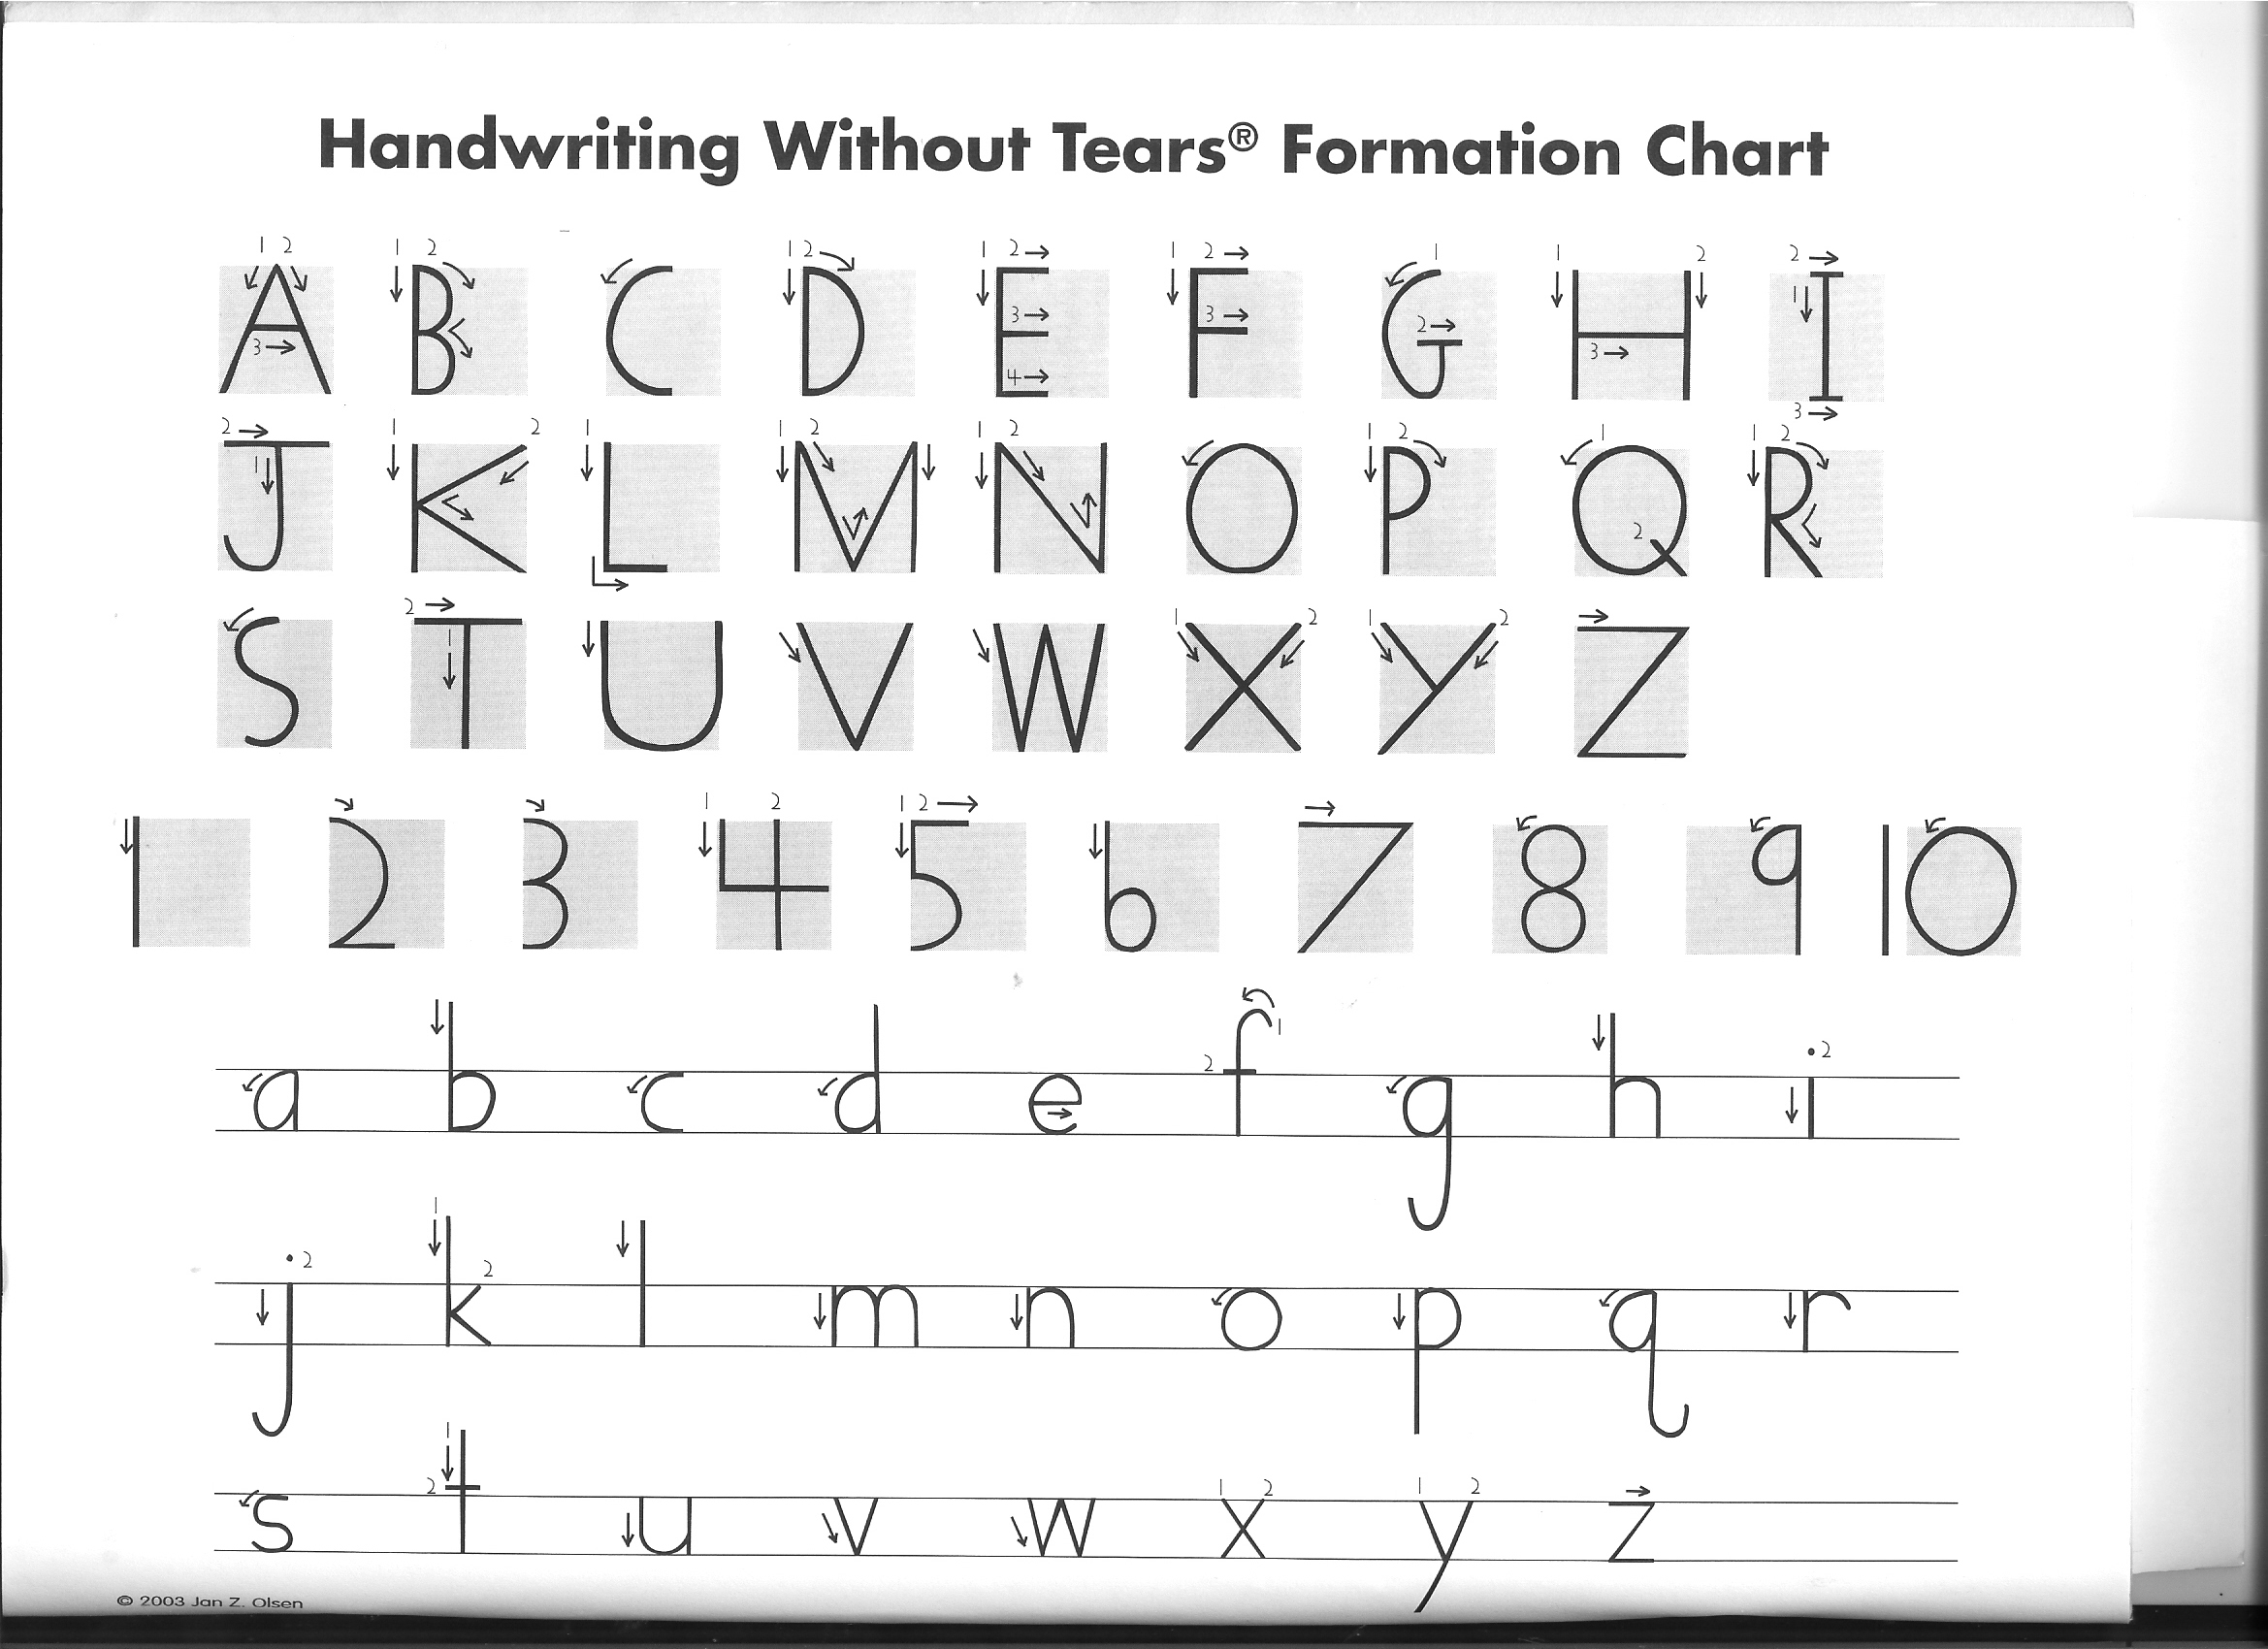 15 Best Images of H Letter Formation Worksheets - Handwriting Without ...